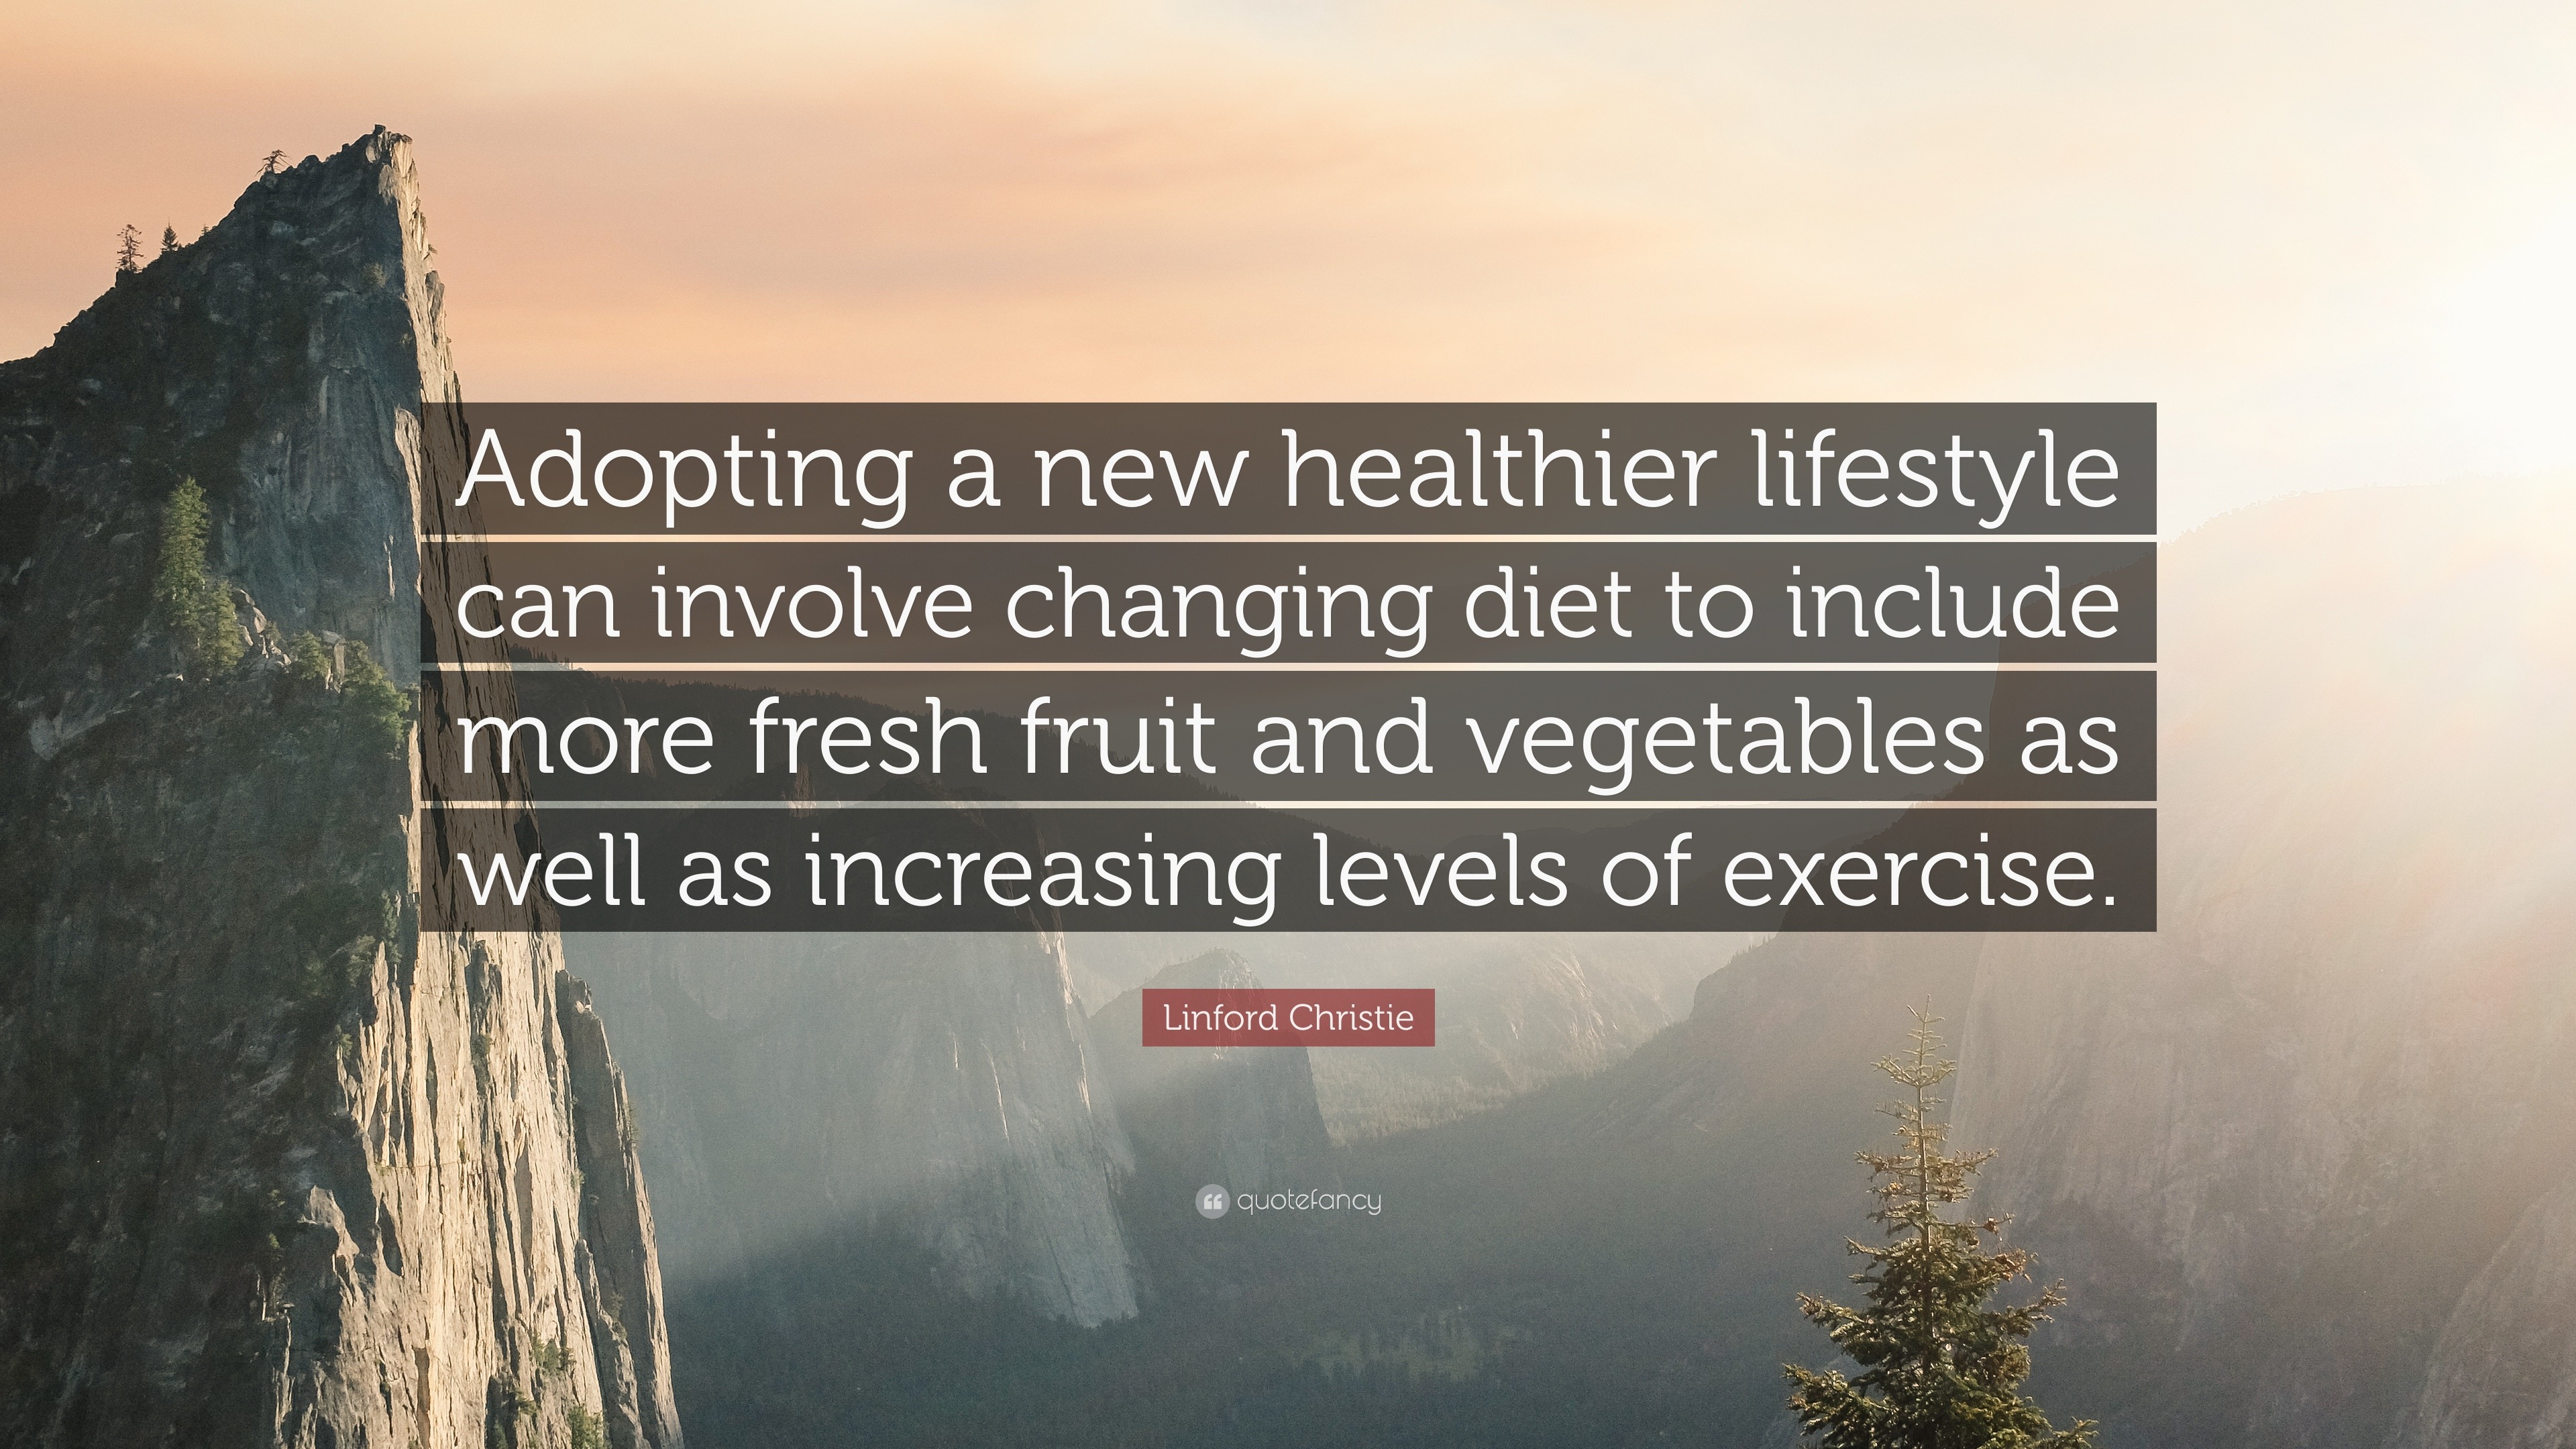 Linford Christie Quote Adopting A New Healthier Lifestyle Can Involve Changing Diet To Include More Fresh Fruit And Vegetables As Well As Incre